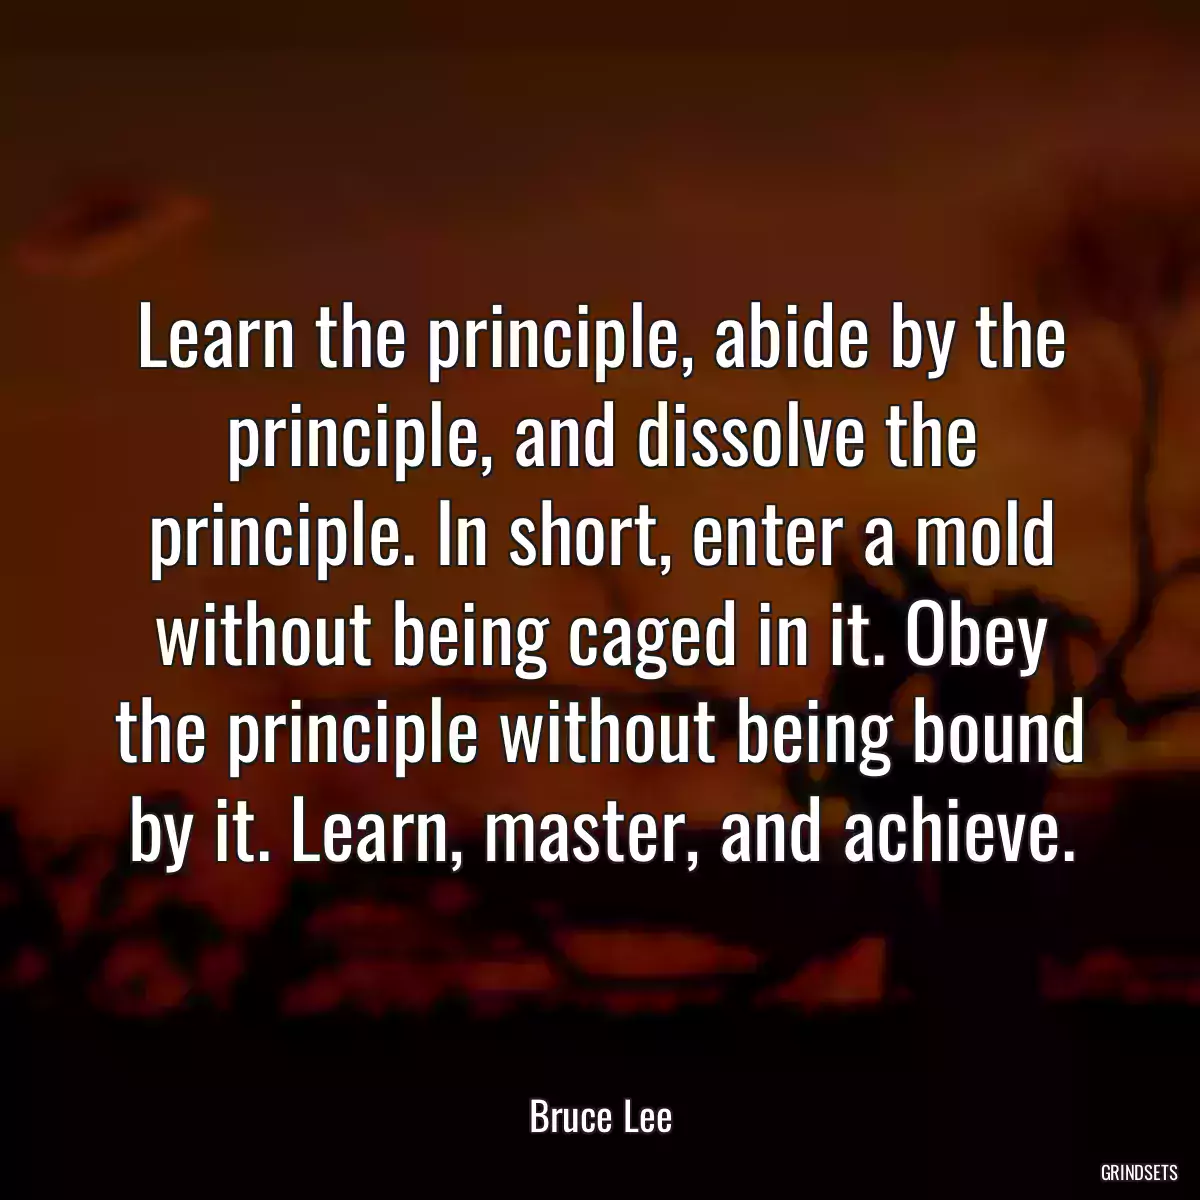 Learn the principle, abide by the principle, and dissolve the principle. In short, enter a mold without being caged in it. Obey the principle without being bound by it. Learn, master, and achieve.